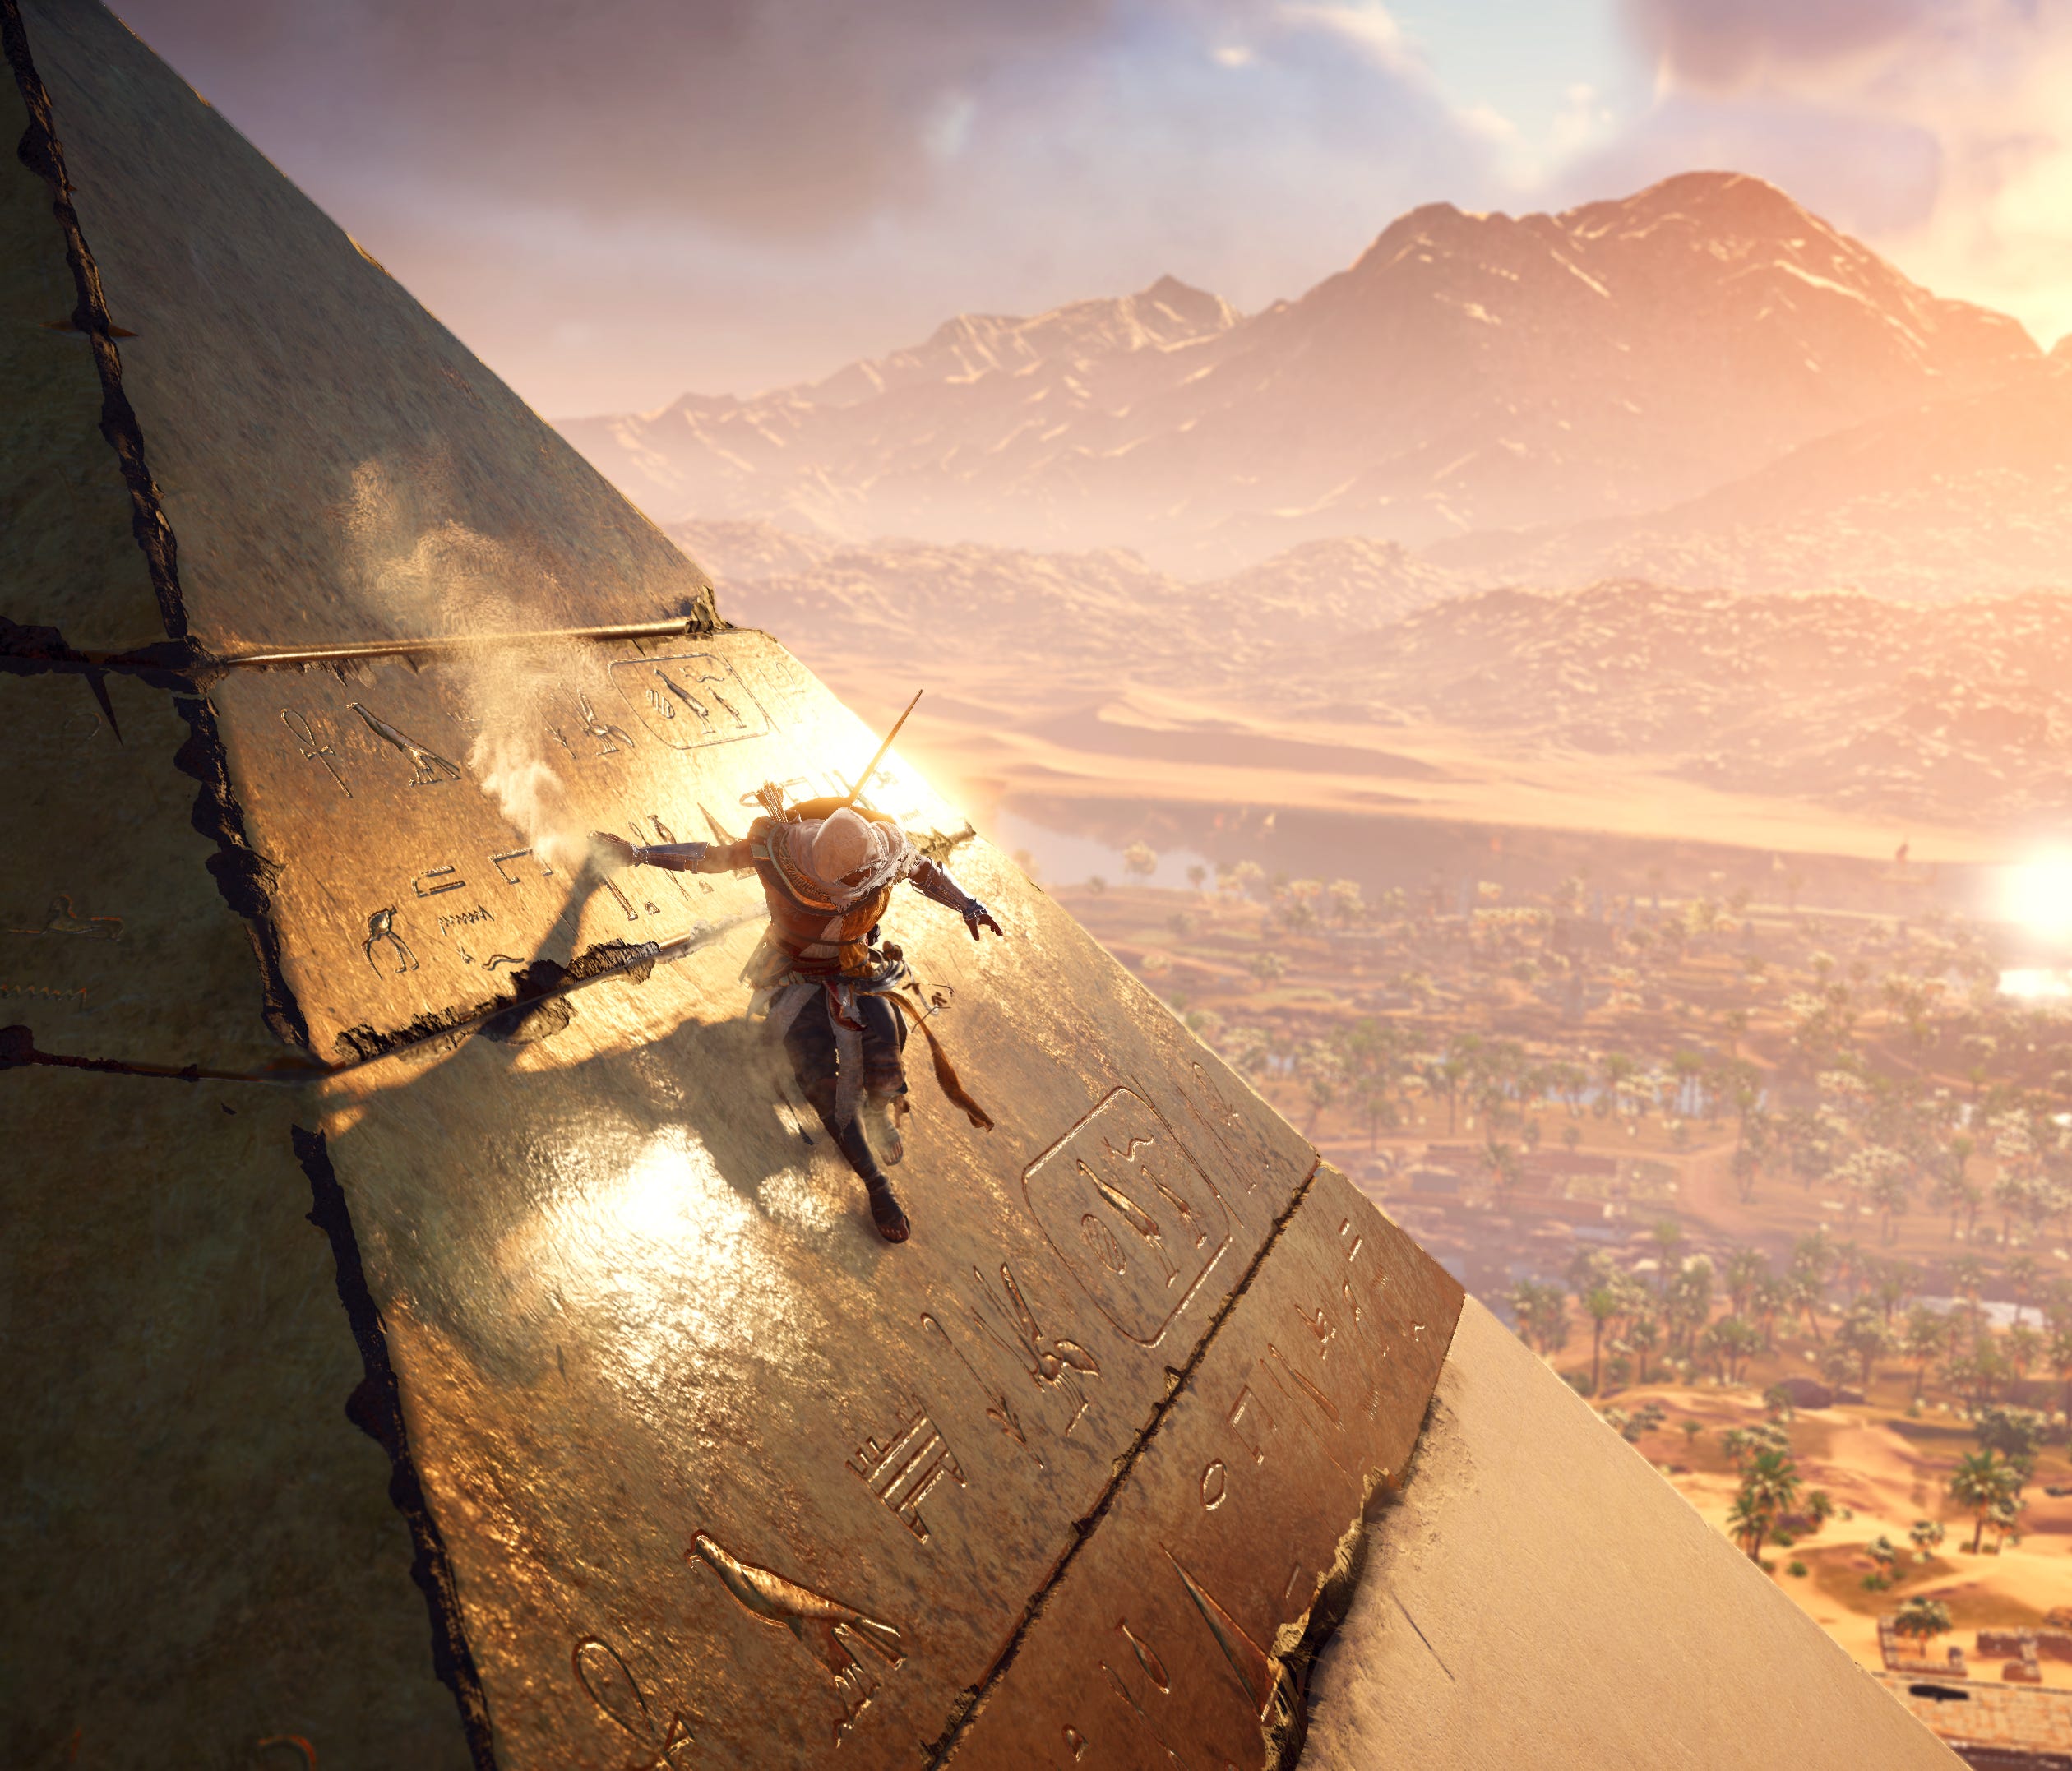 Ubisoft's franchise gets a reboot, now teleporting players into Ancient Egypt.